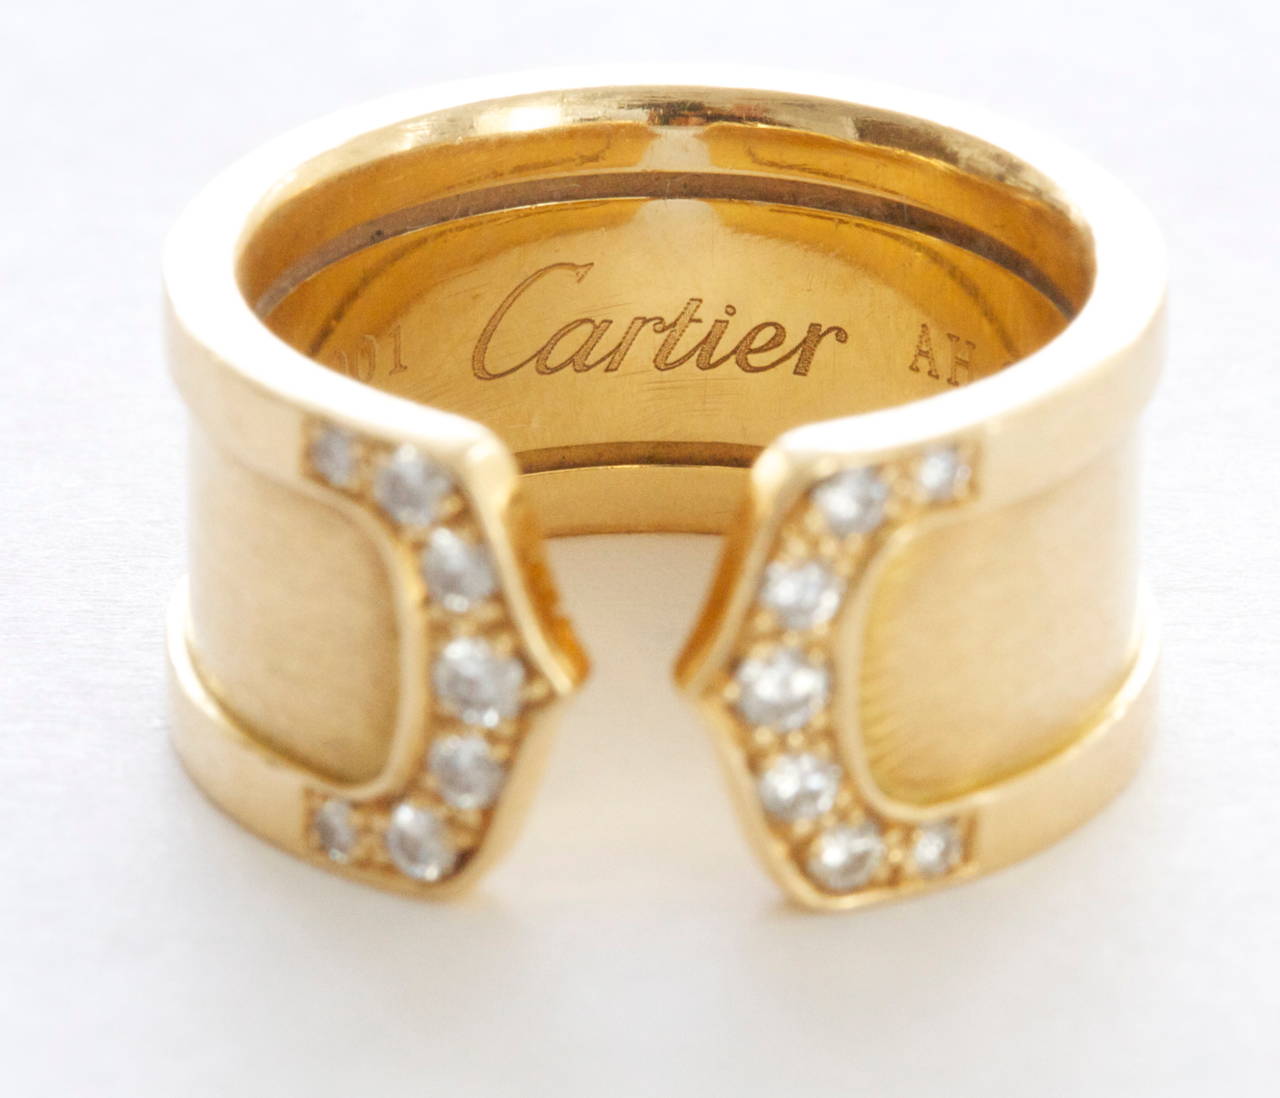 Large Cartier Double C Diamond Ring at 